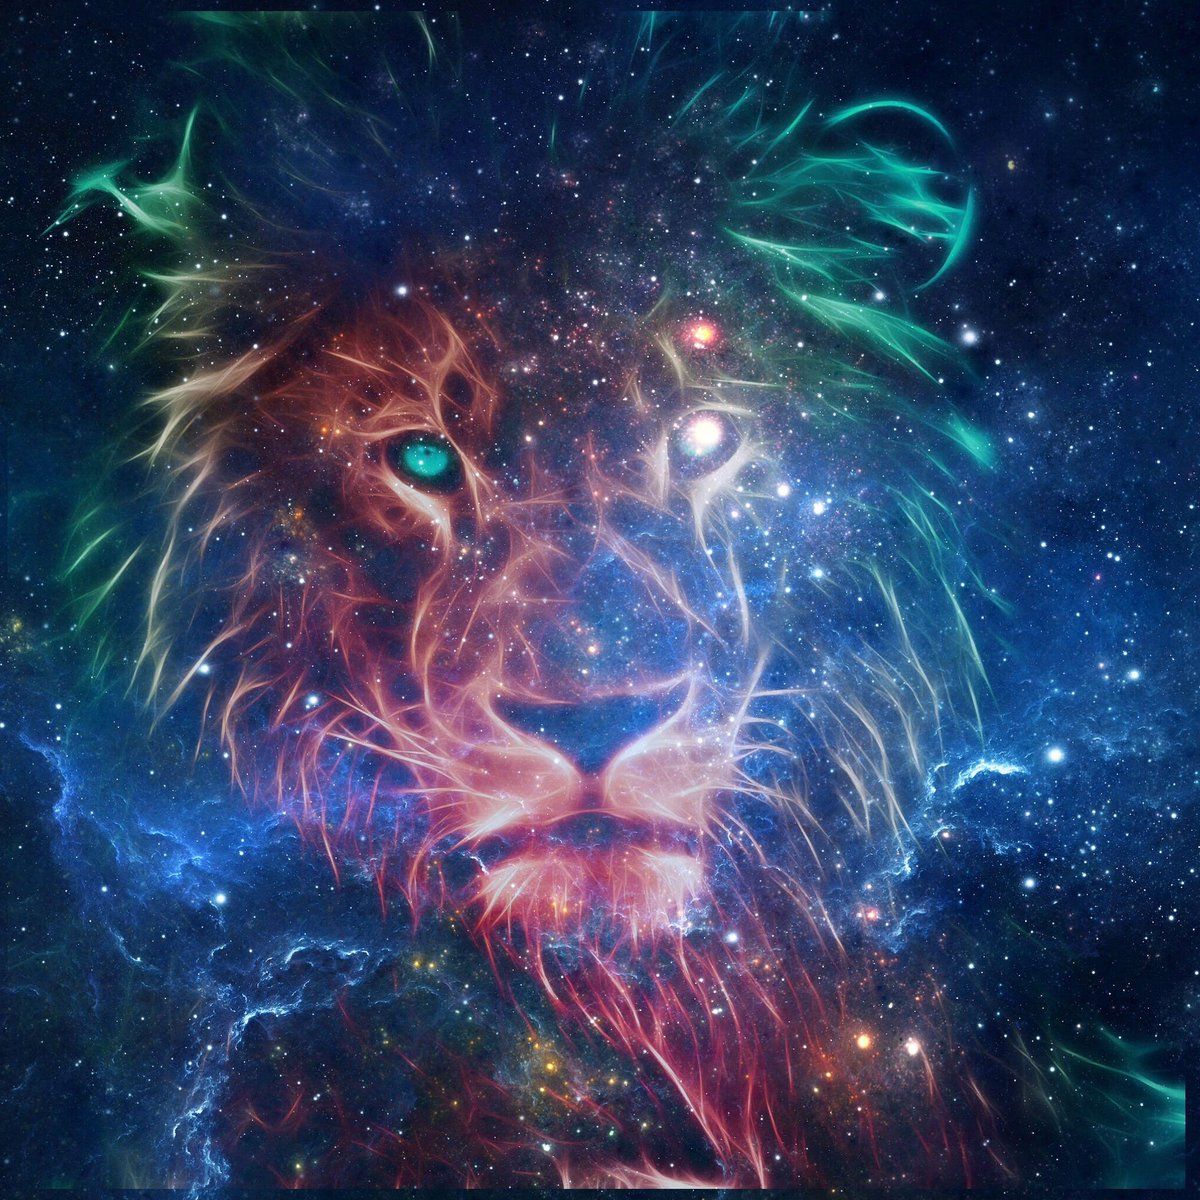 HD Wallpaper by Petra Ohmer Android-> iPhone-> #lion #blue #red #stars #wallpaper #HDWallpaper